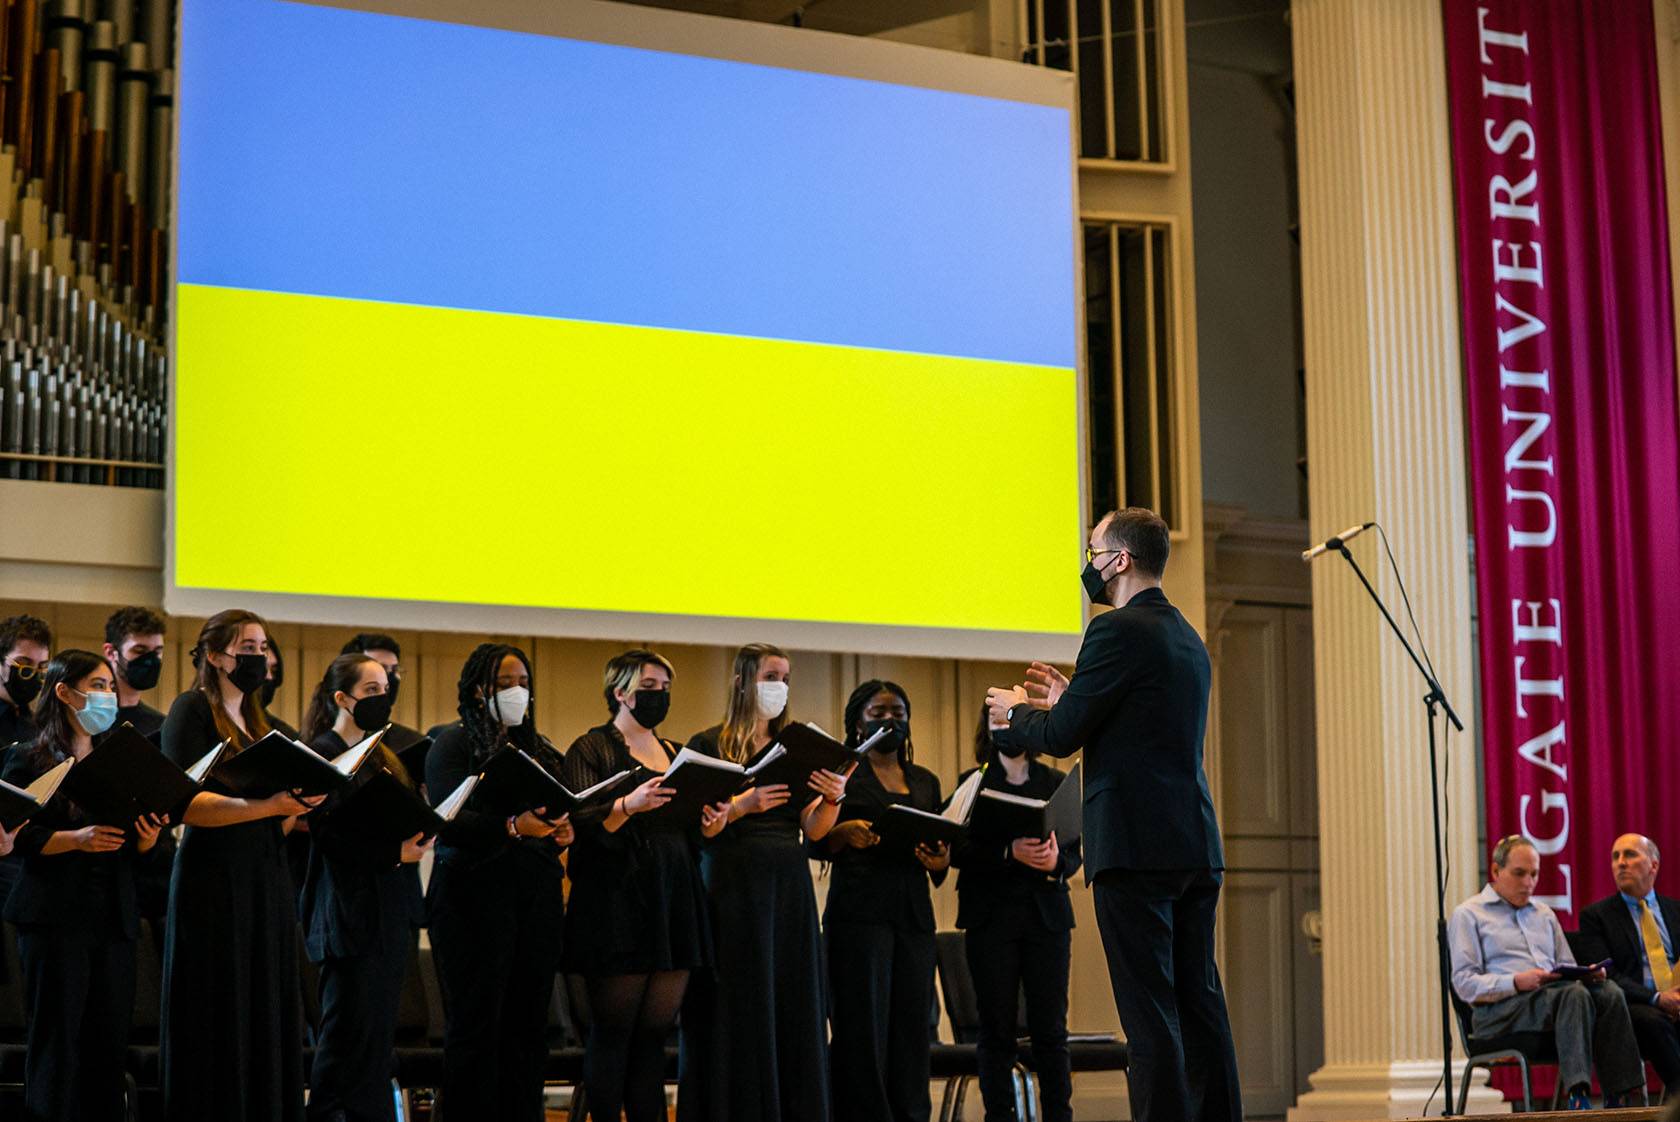 Colgate Chamber Singers perform at a recent vigil in solidarity with the people of Ukraine.